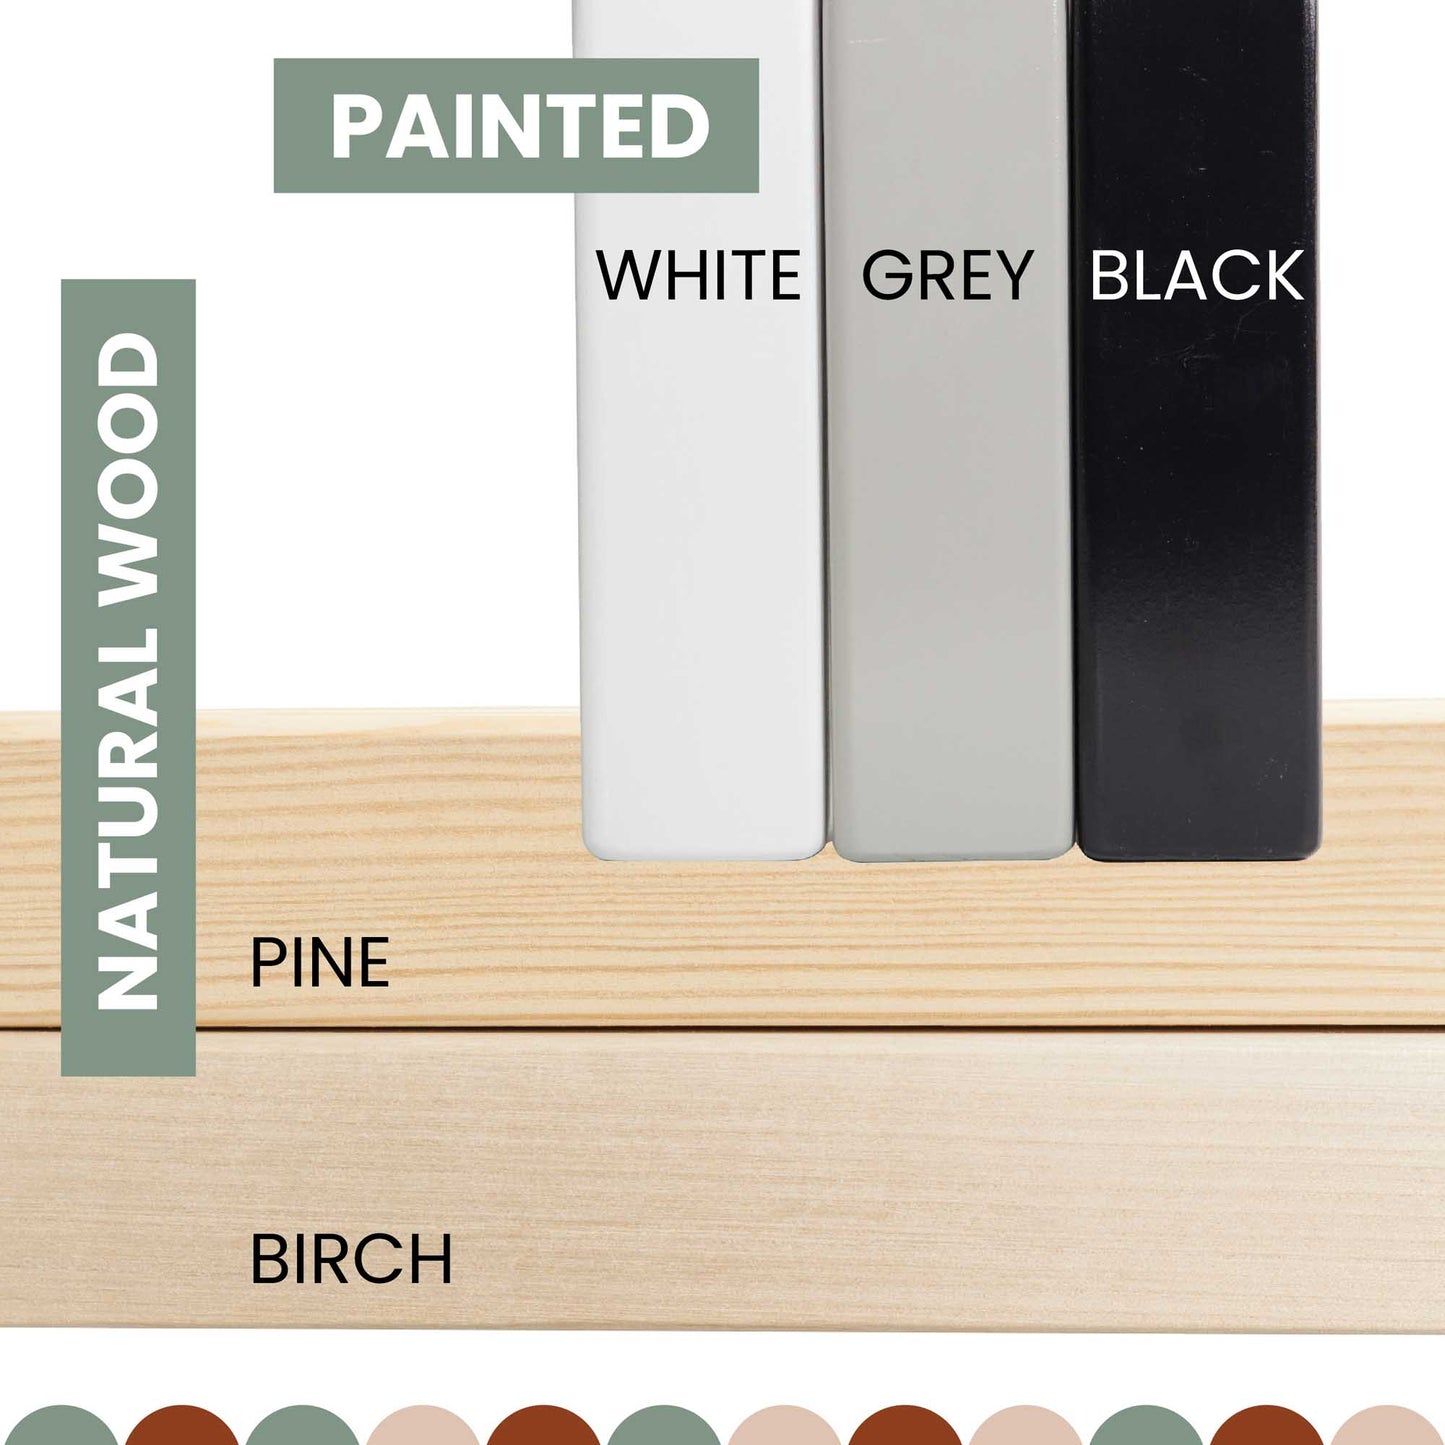 The paint colors for the Sweet Home From Wood 2-in-1 toddler bed on legs with a vertical rail headboard, made of solid pine and birch wood.